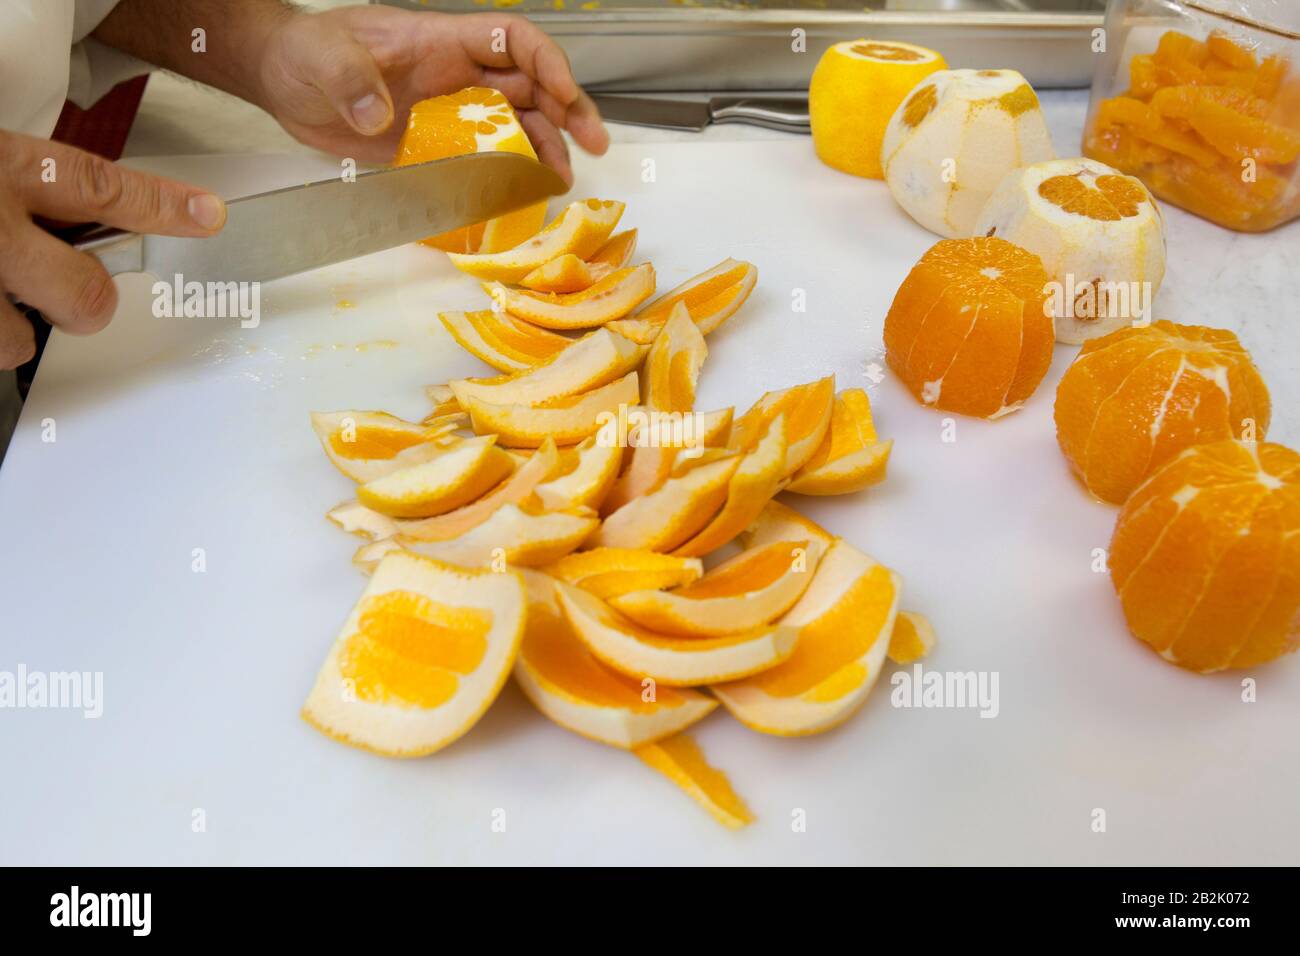 Close-up of hands slicing oranges with knife Stock Photo